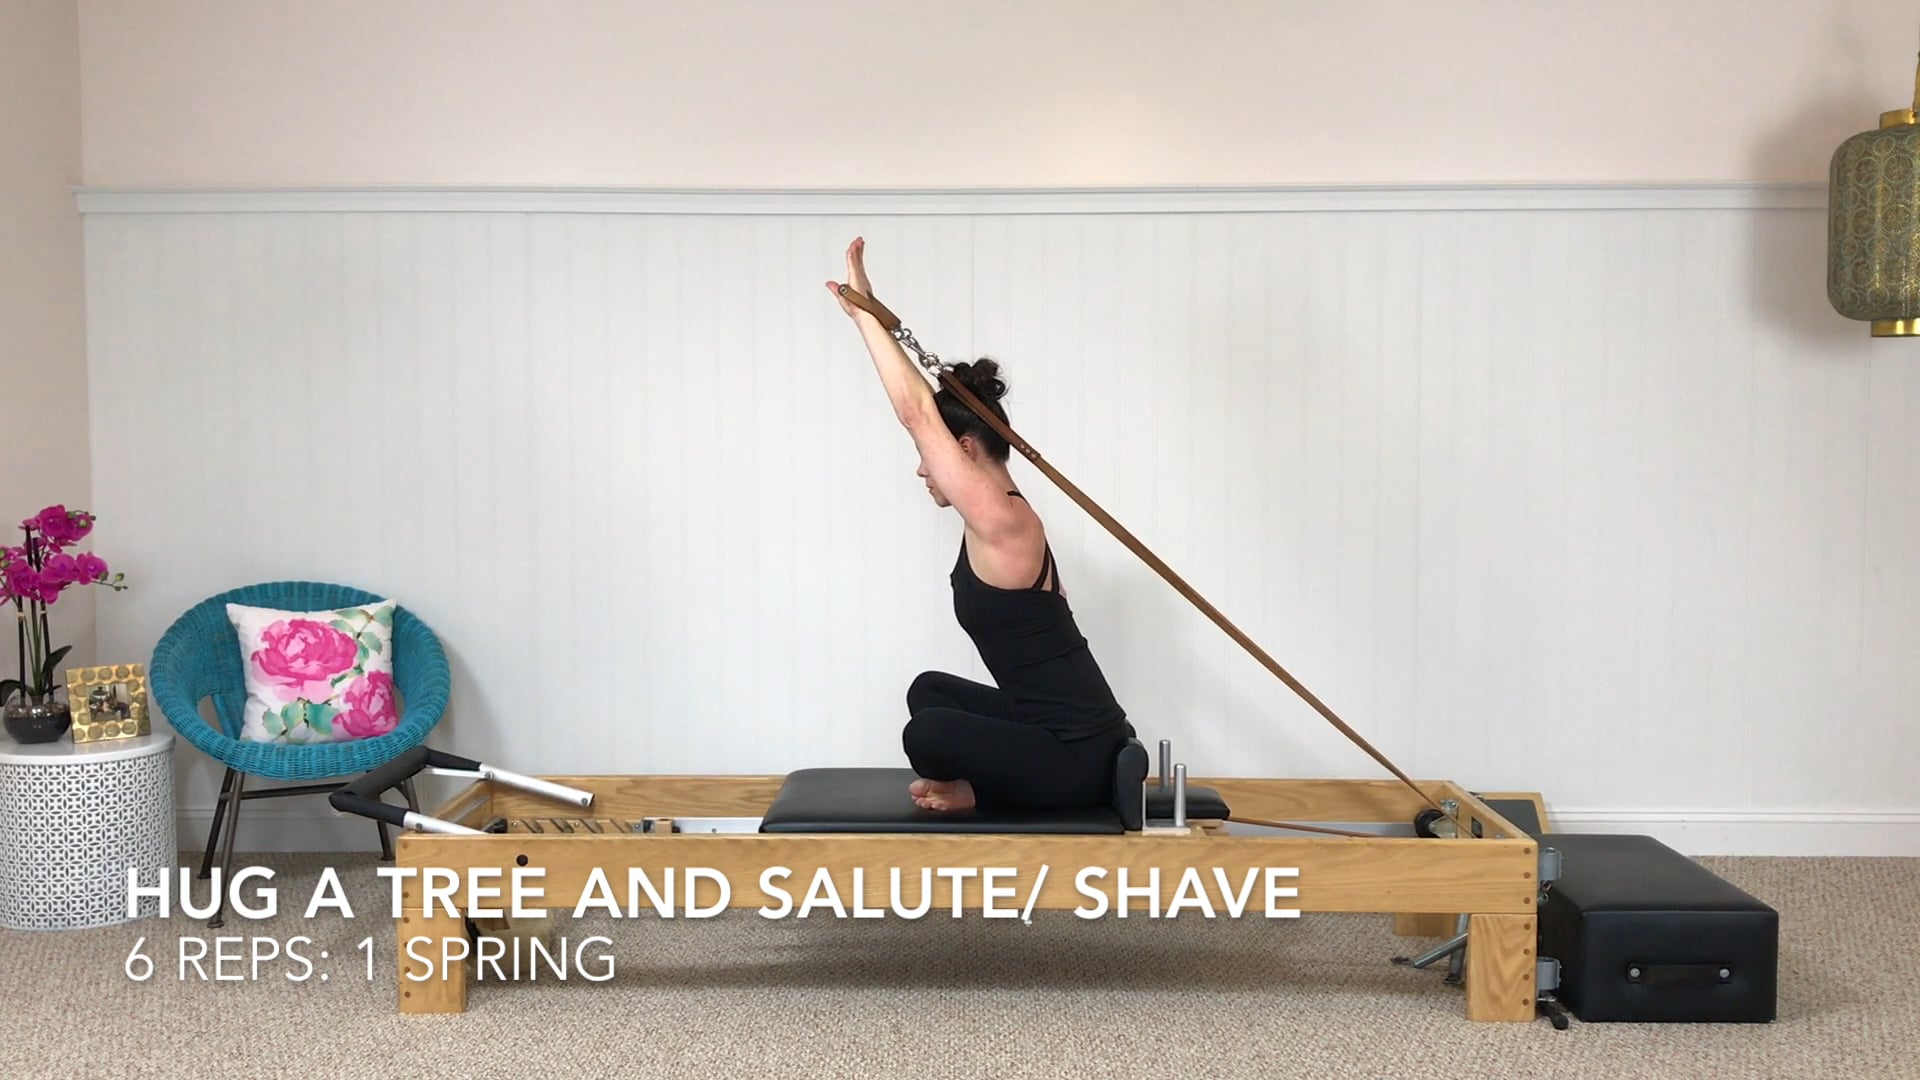 Hug A Tree and Salute/Shave 